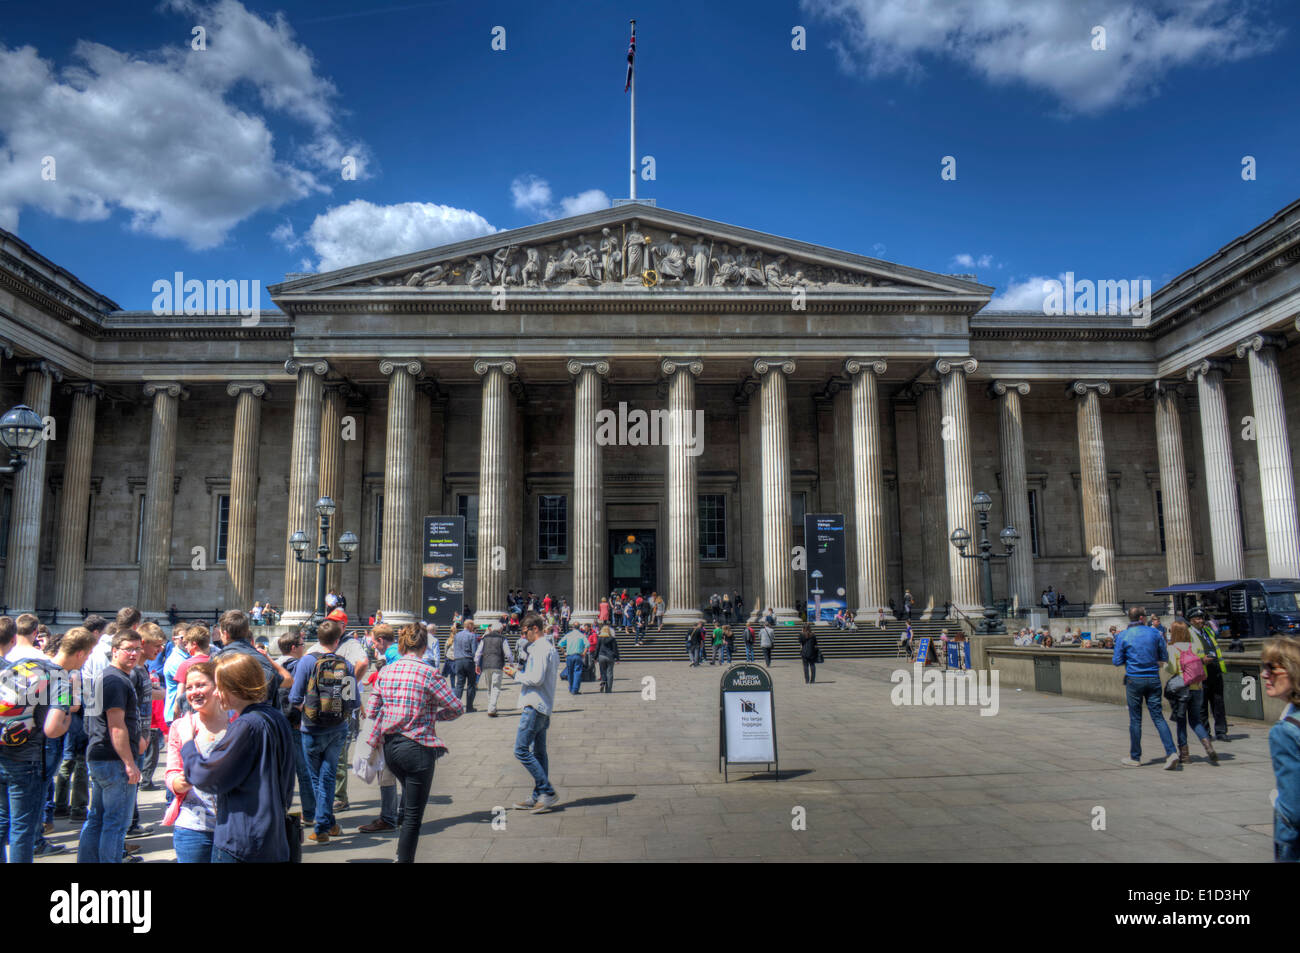 HDR image of tourists gathering outside the entrance to the British Museum in London, England Stock Photo